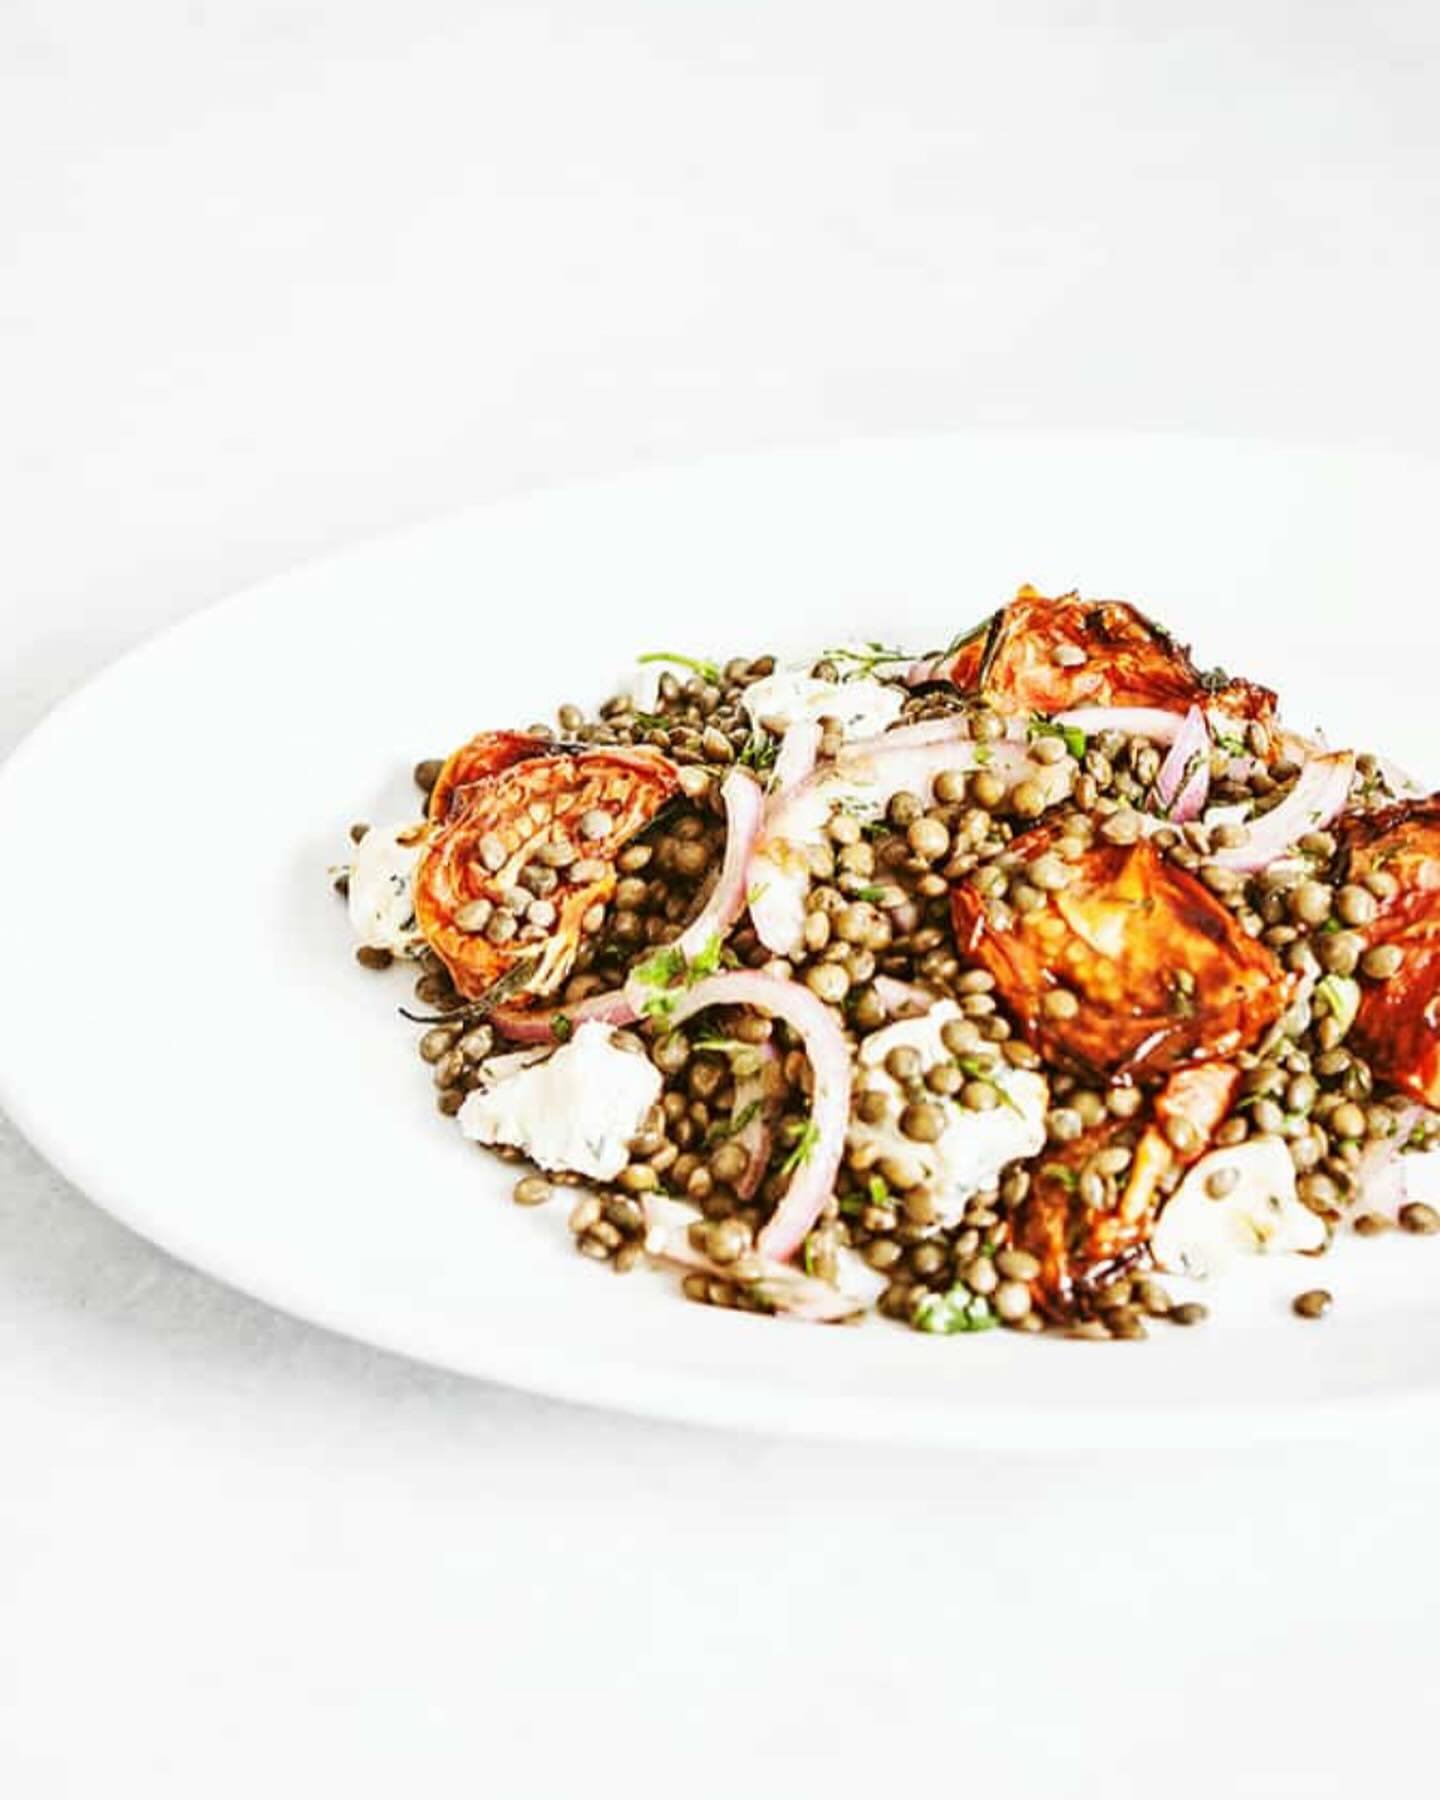 BEAUTIFUL FOOD BY DESIGN | French Puy lentils, the smallest, deep green lentils make the most interesting salads. Today a delightful salad, Puy Lentils with Roasted Tomatoes &amp; Gorgonzola&ndash;another Little Jewel from the Bijouxs Kitchen. 

TAP 